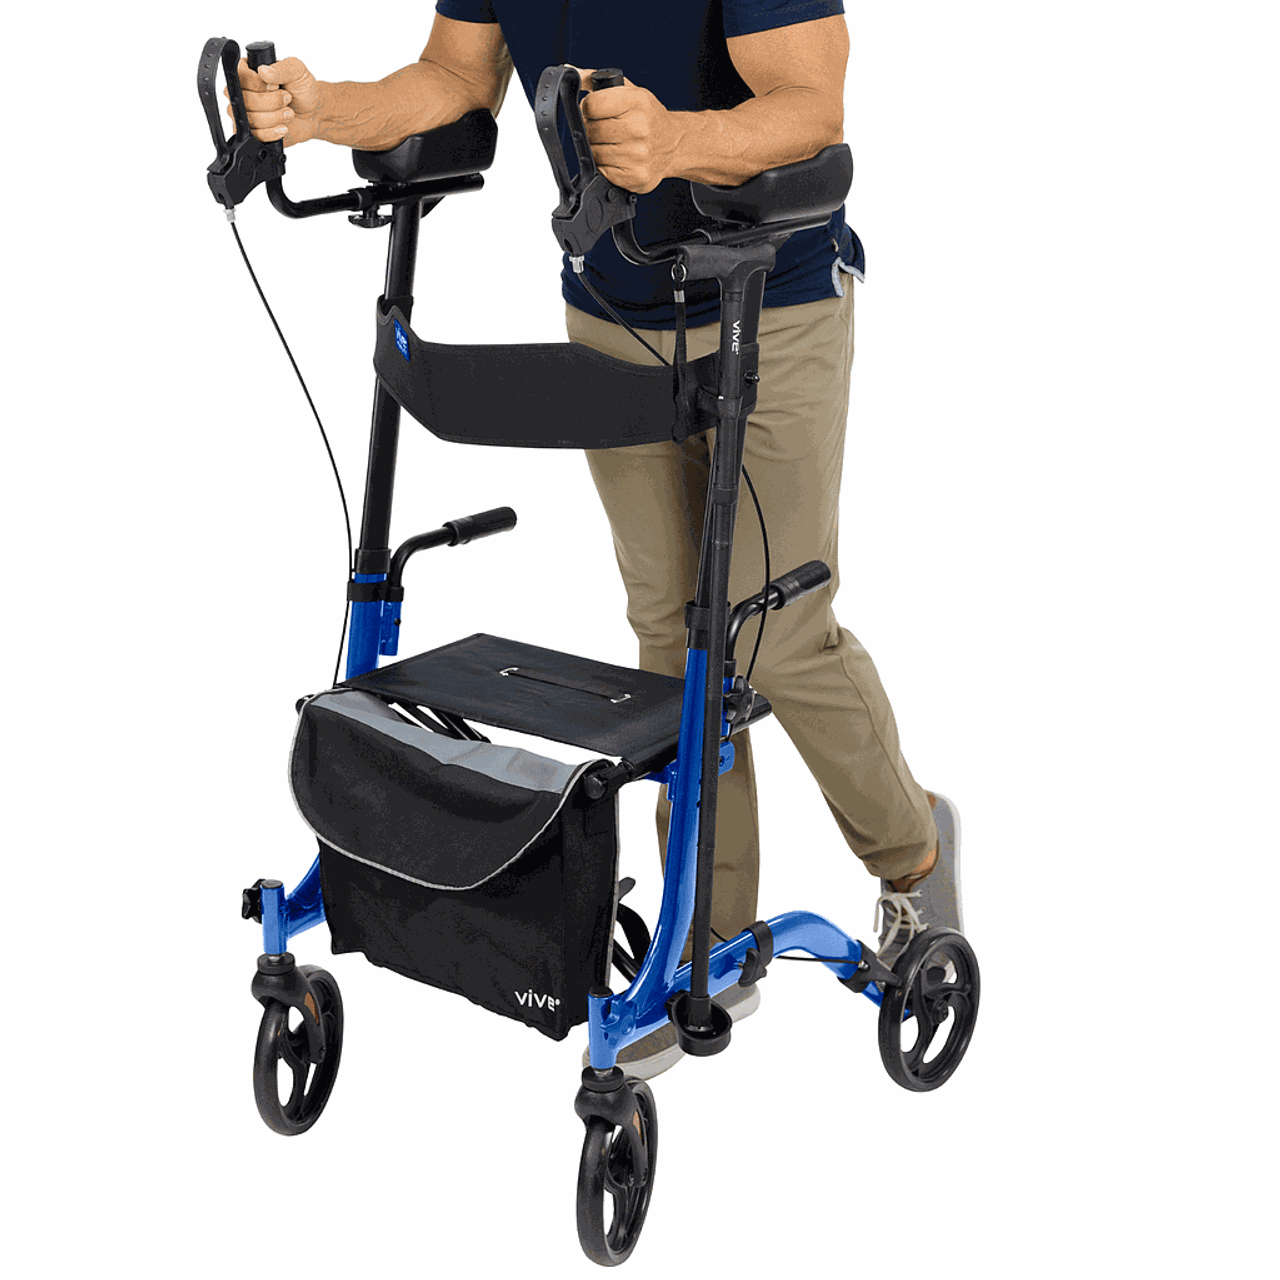 Vive Upright Walker - Comfortable and Stable Walking Aid with Adjustable Handles-Chicken Pieces